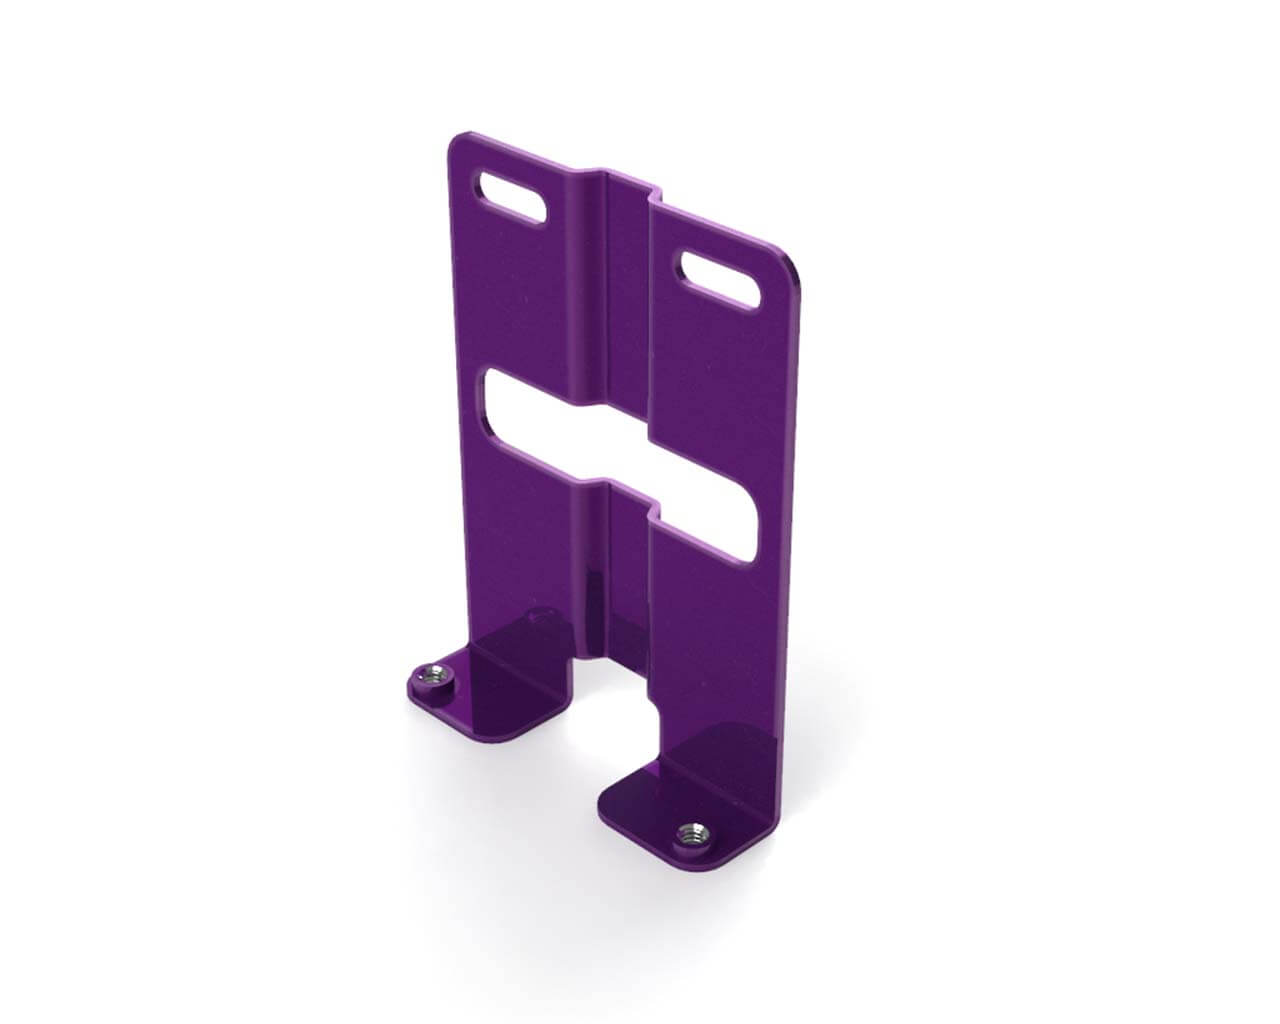 PrimoChill SX Upright CTR2 Mount Bracket - PrimoChill - KEEPING IT COOL Candy Purple